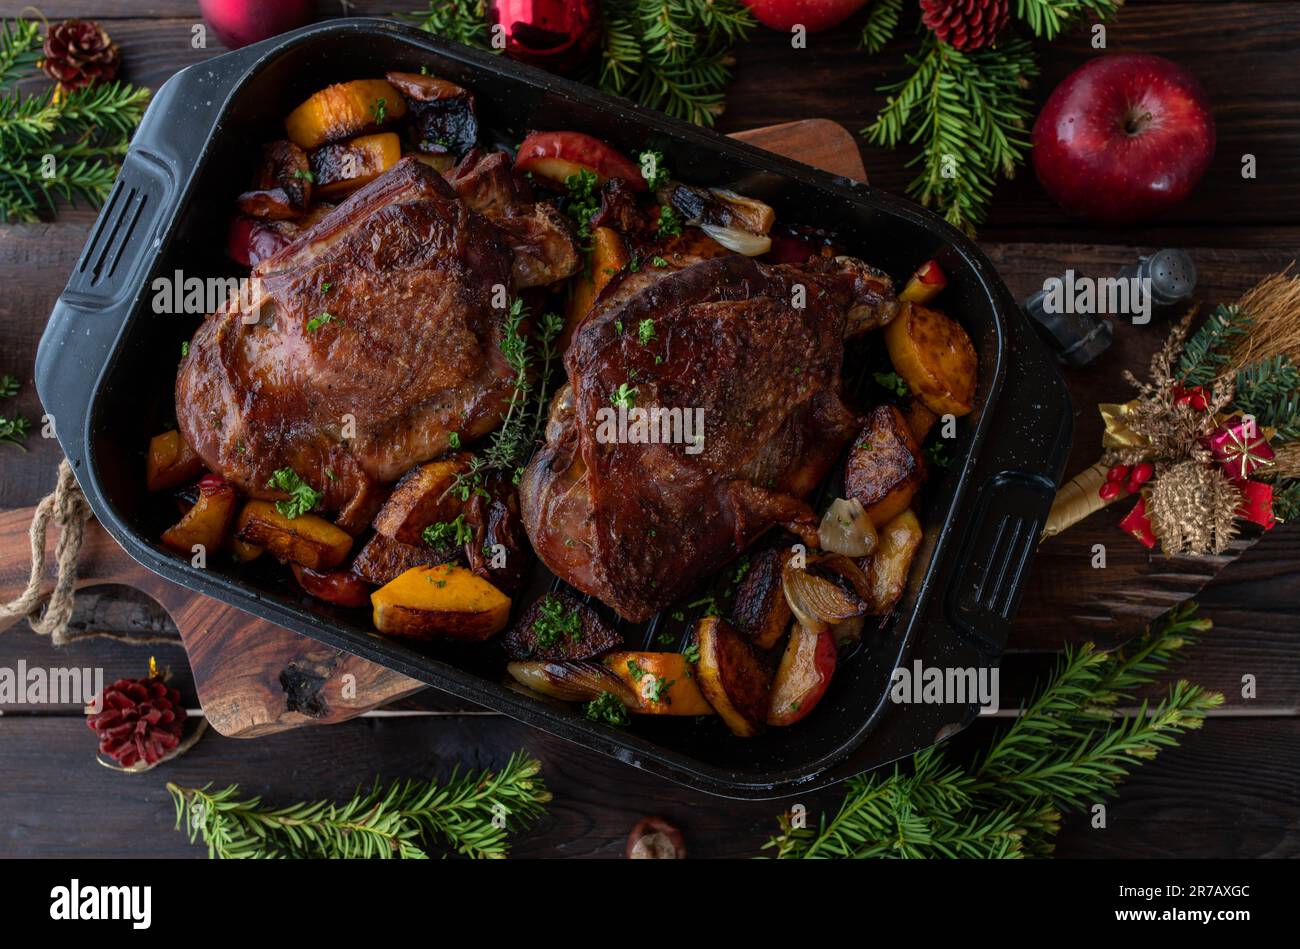 Christmas meat dish with roasted turkey shank and vegetables on wooden table Stock Photo